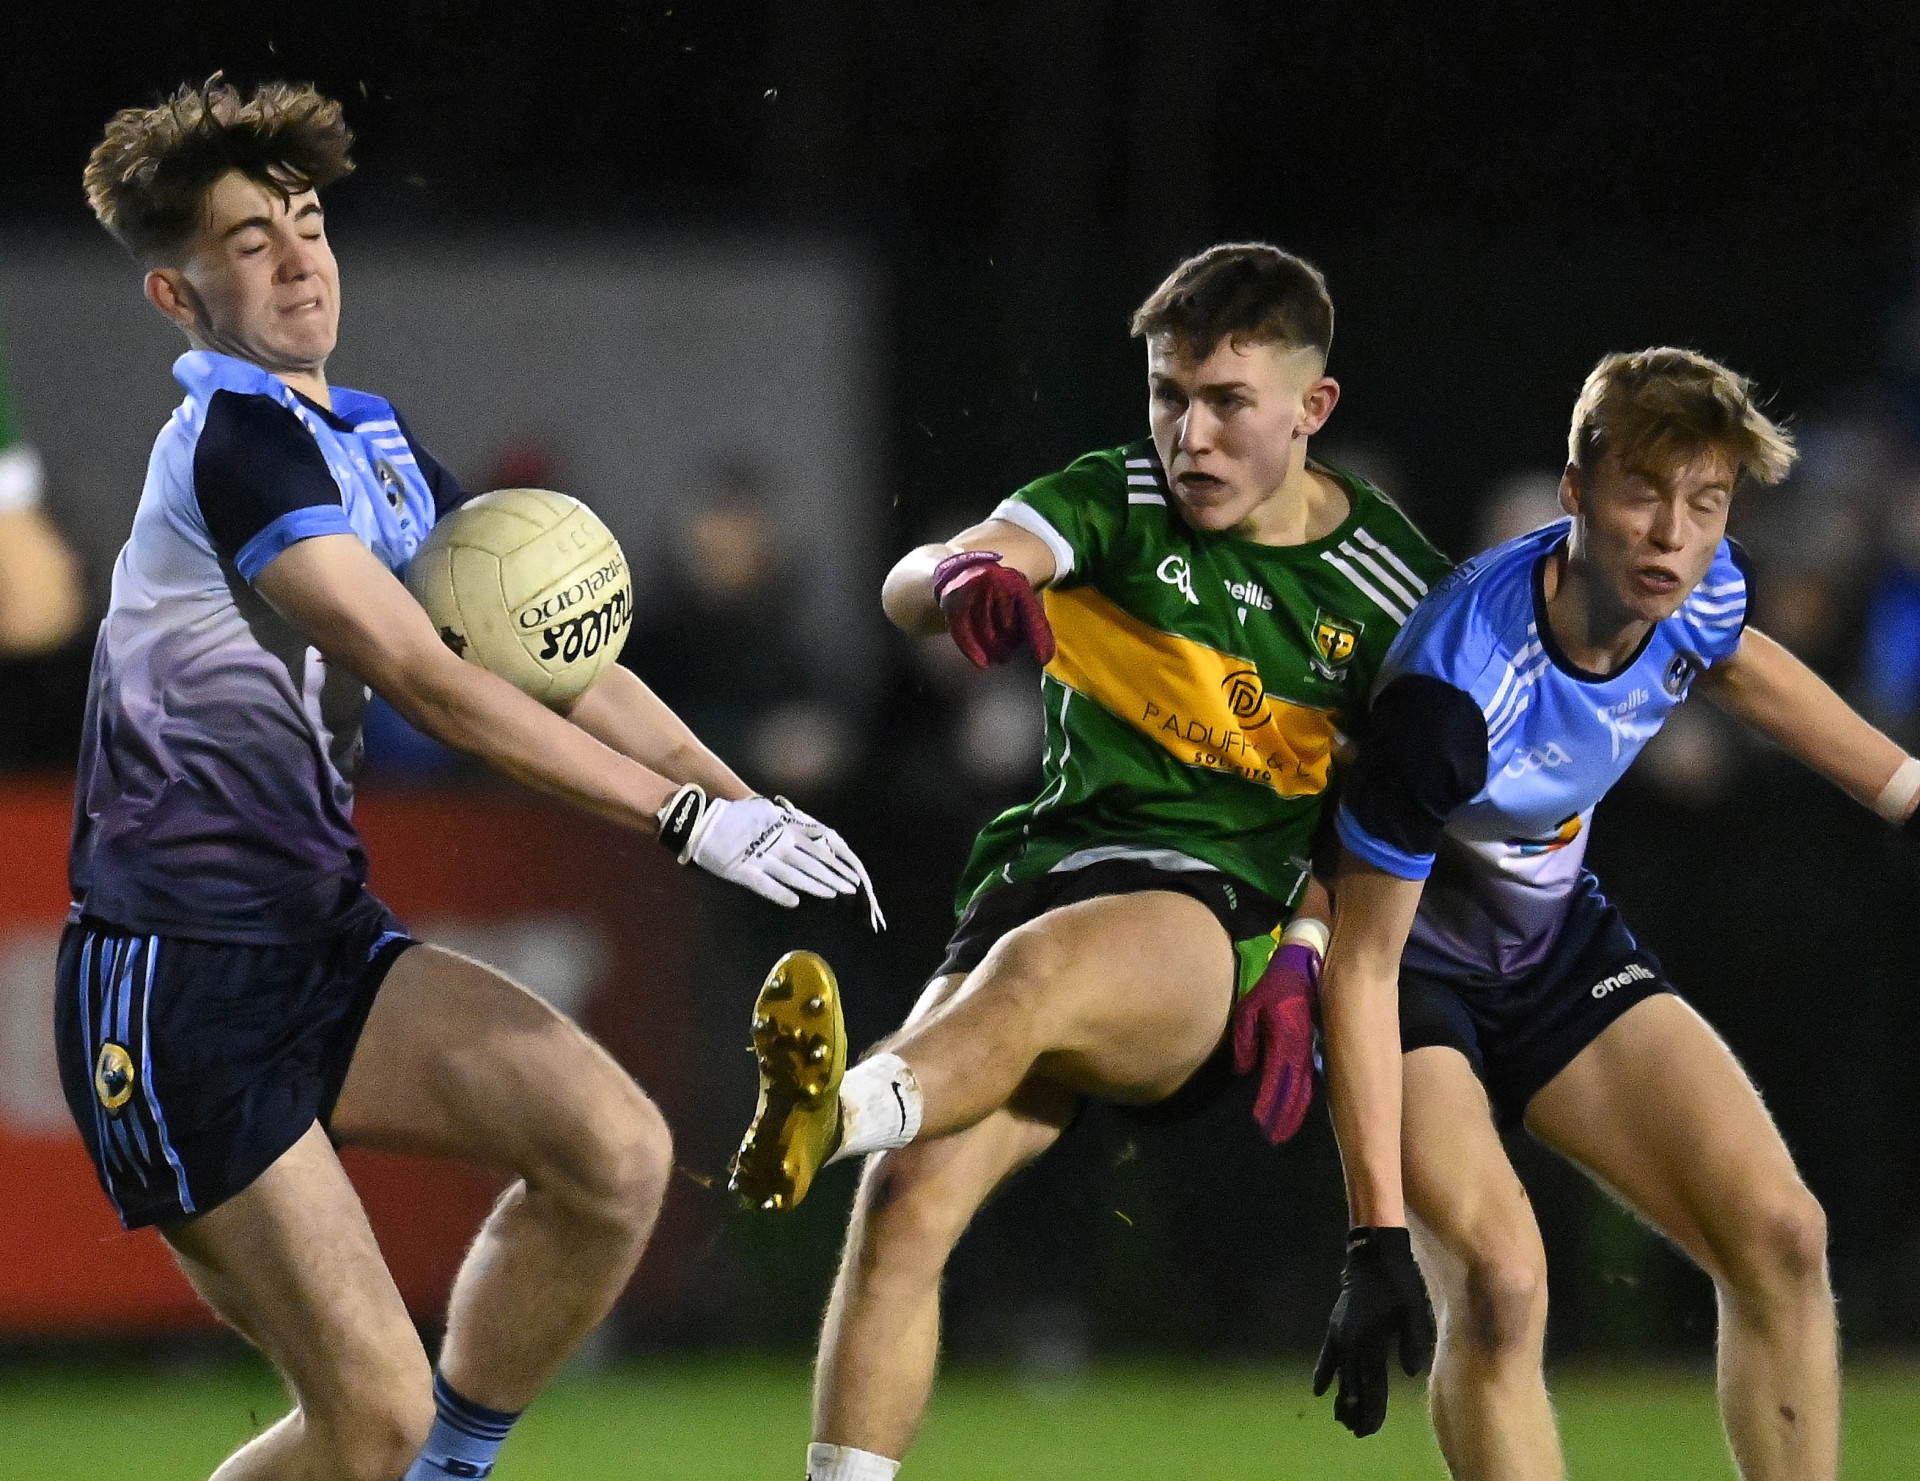 Mixed fortunes for East Tyrone schools in MacRory Cup